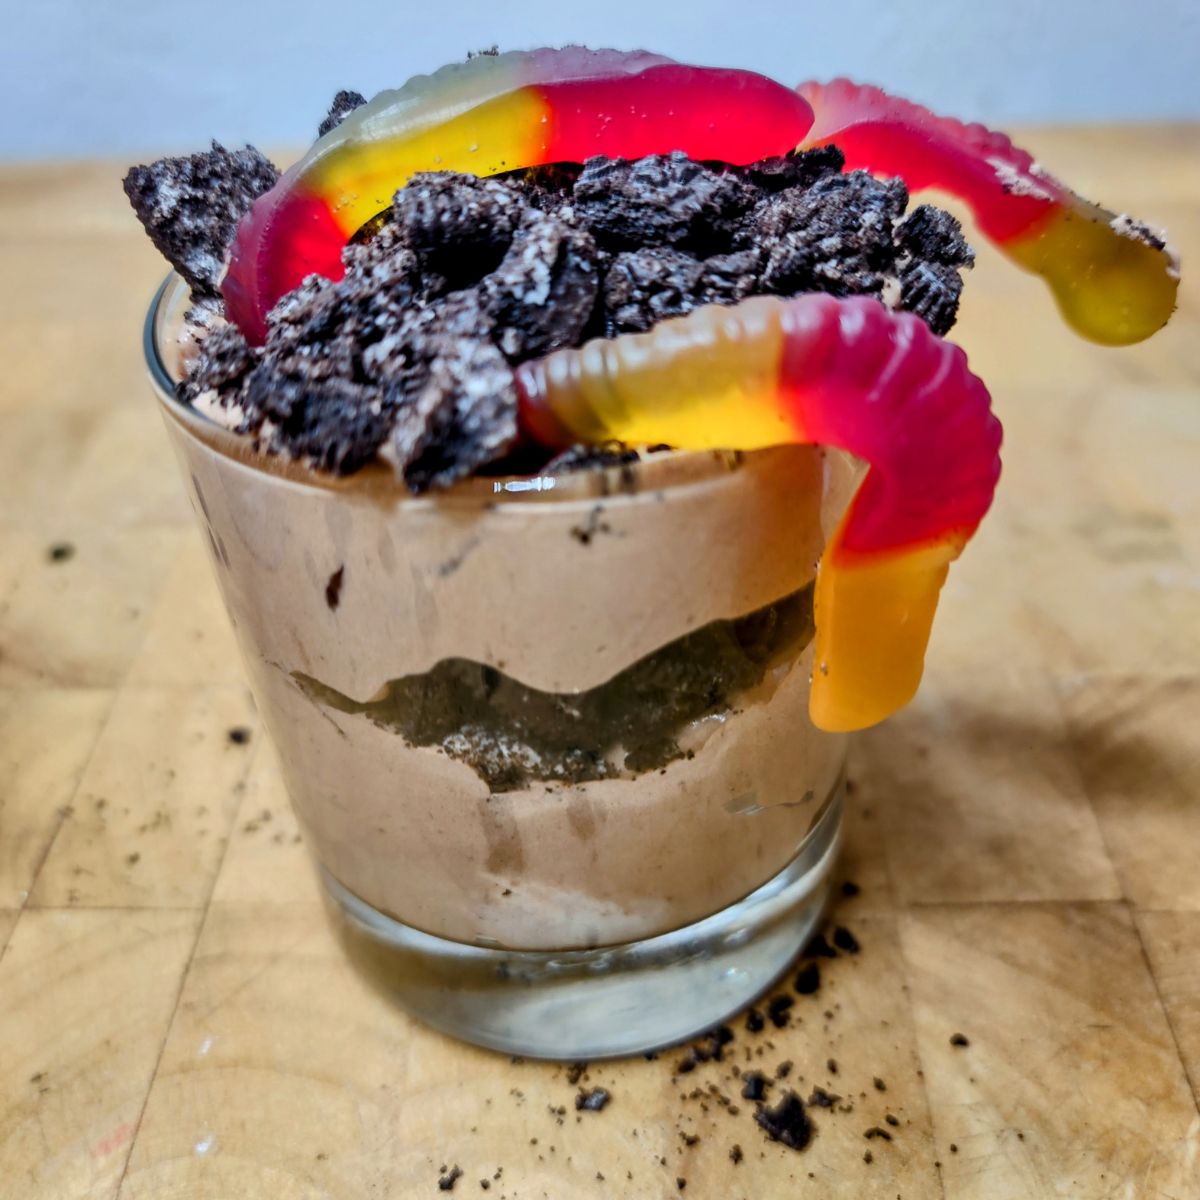 Pudding dirty cup with gummy worms on a wooden table.